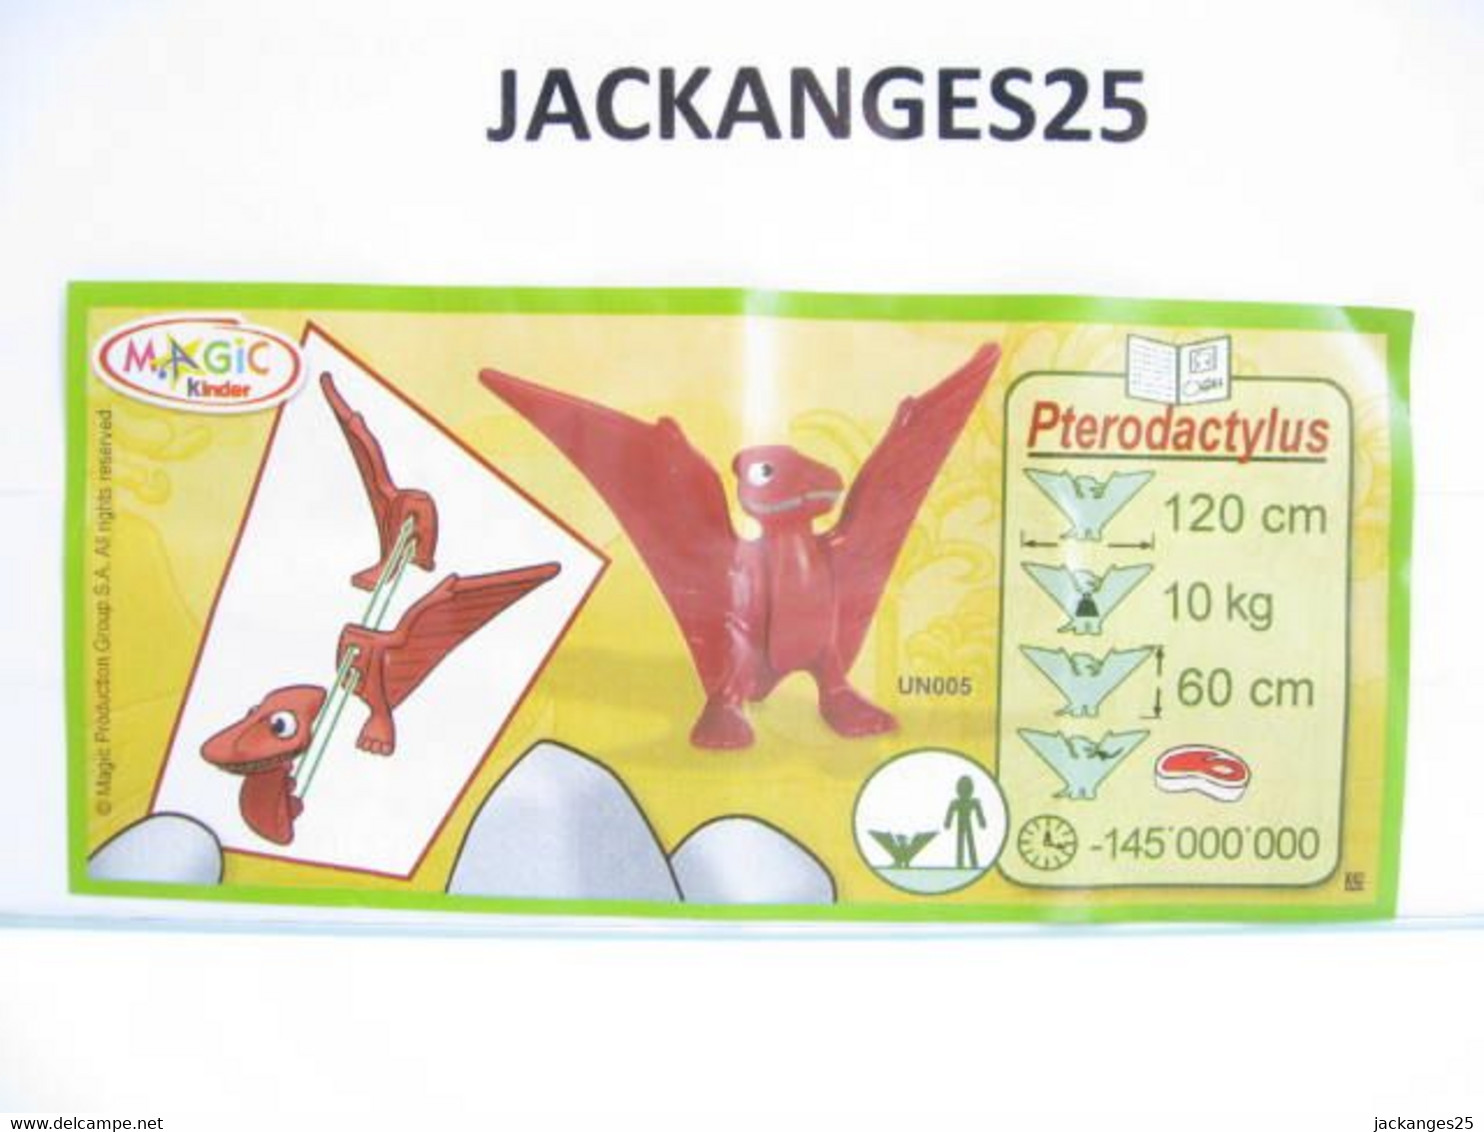 KINDER MPG UN 05 A DINOSAURE PTERODACTYLUS ANIMAUX NATURE NATOONS TIERE 2010 + BPZ A NATURE - Familles